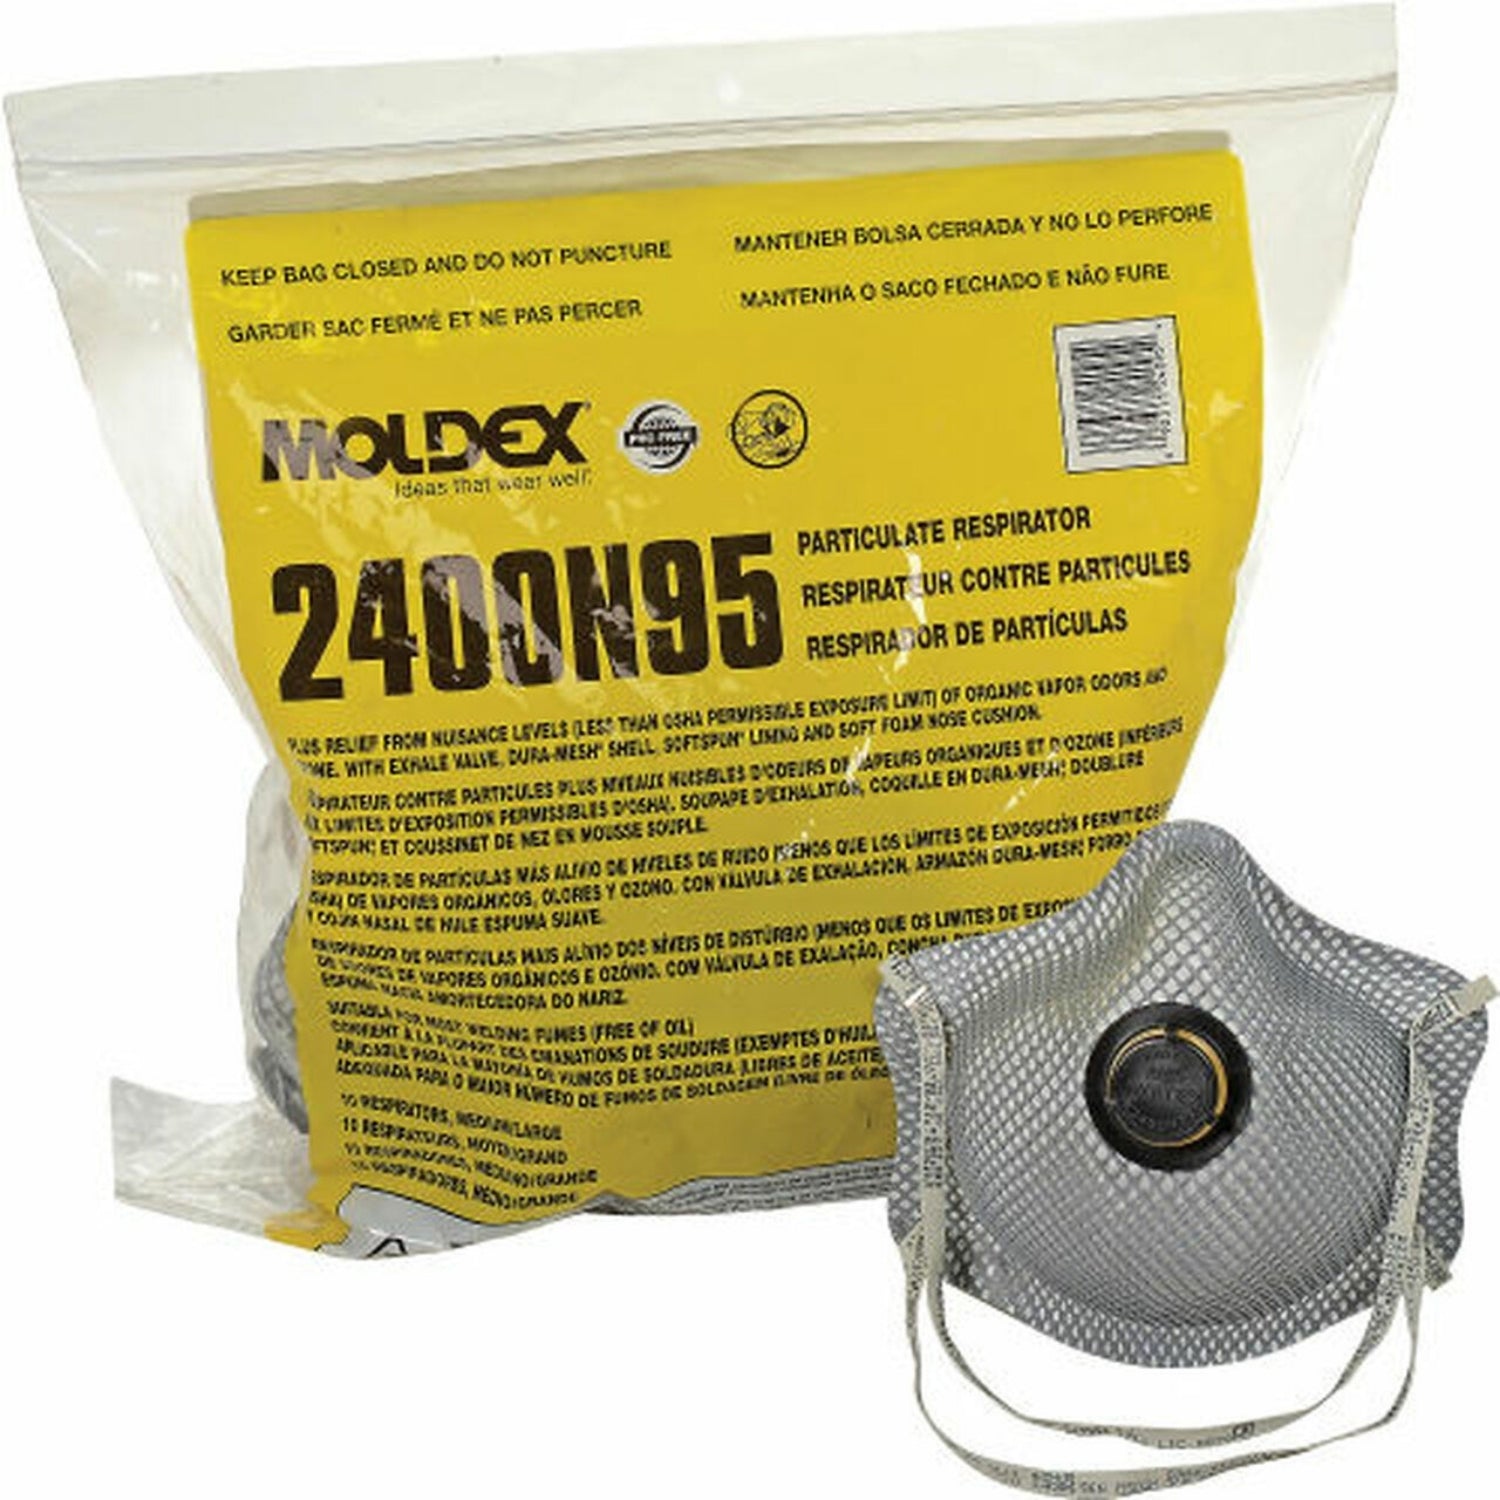 MOLDEX 2400N95 - Plus Relief From Organic Vapors Particulate Respirator With Exhale Valve - 10/BOX